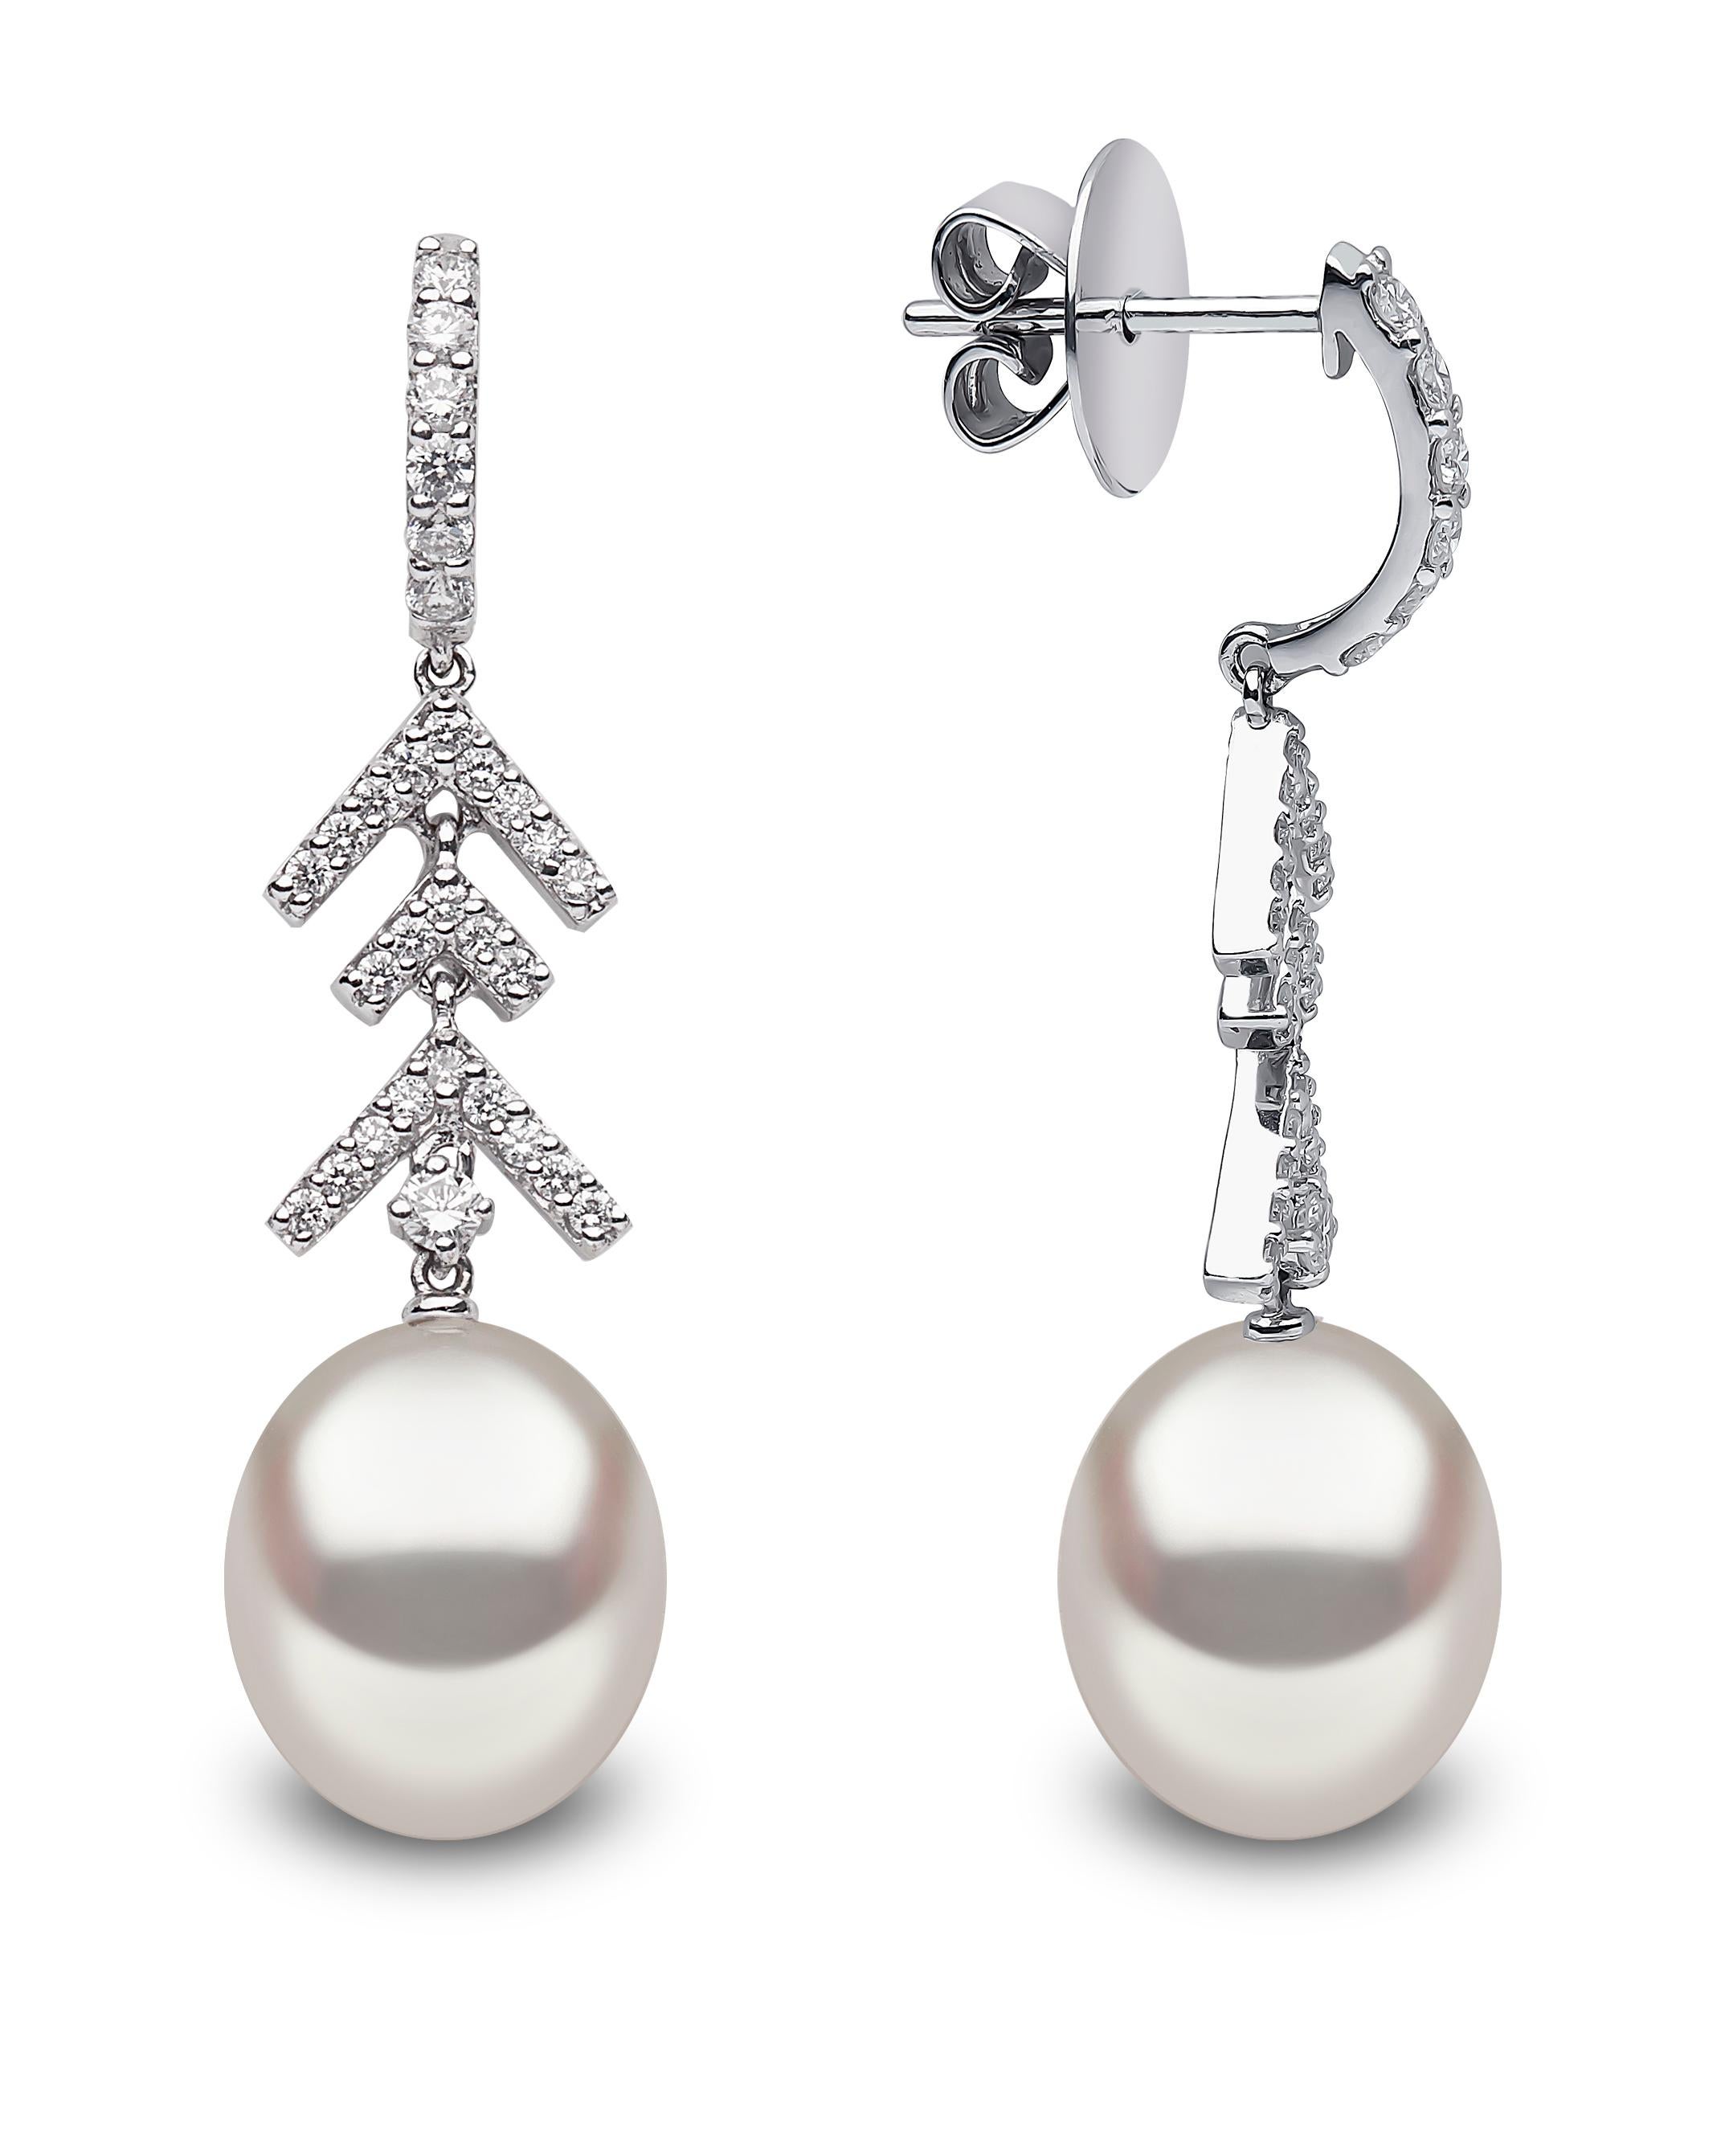 These striking earrings by Yoko London feature lustrous 11-12mm South Sea pearls beneath diamond arrows. Masterfully engineered, these earrings have been designed to move with their wearer to ensure a continuous sparkle whenever they are worn. Pair